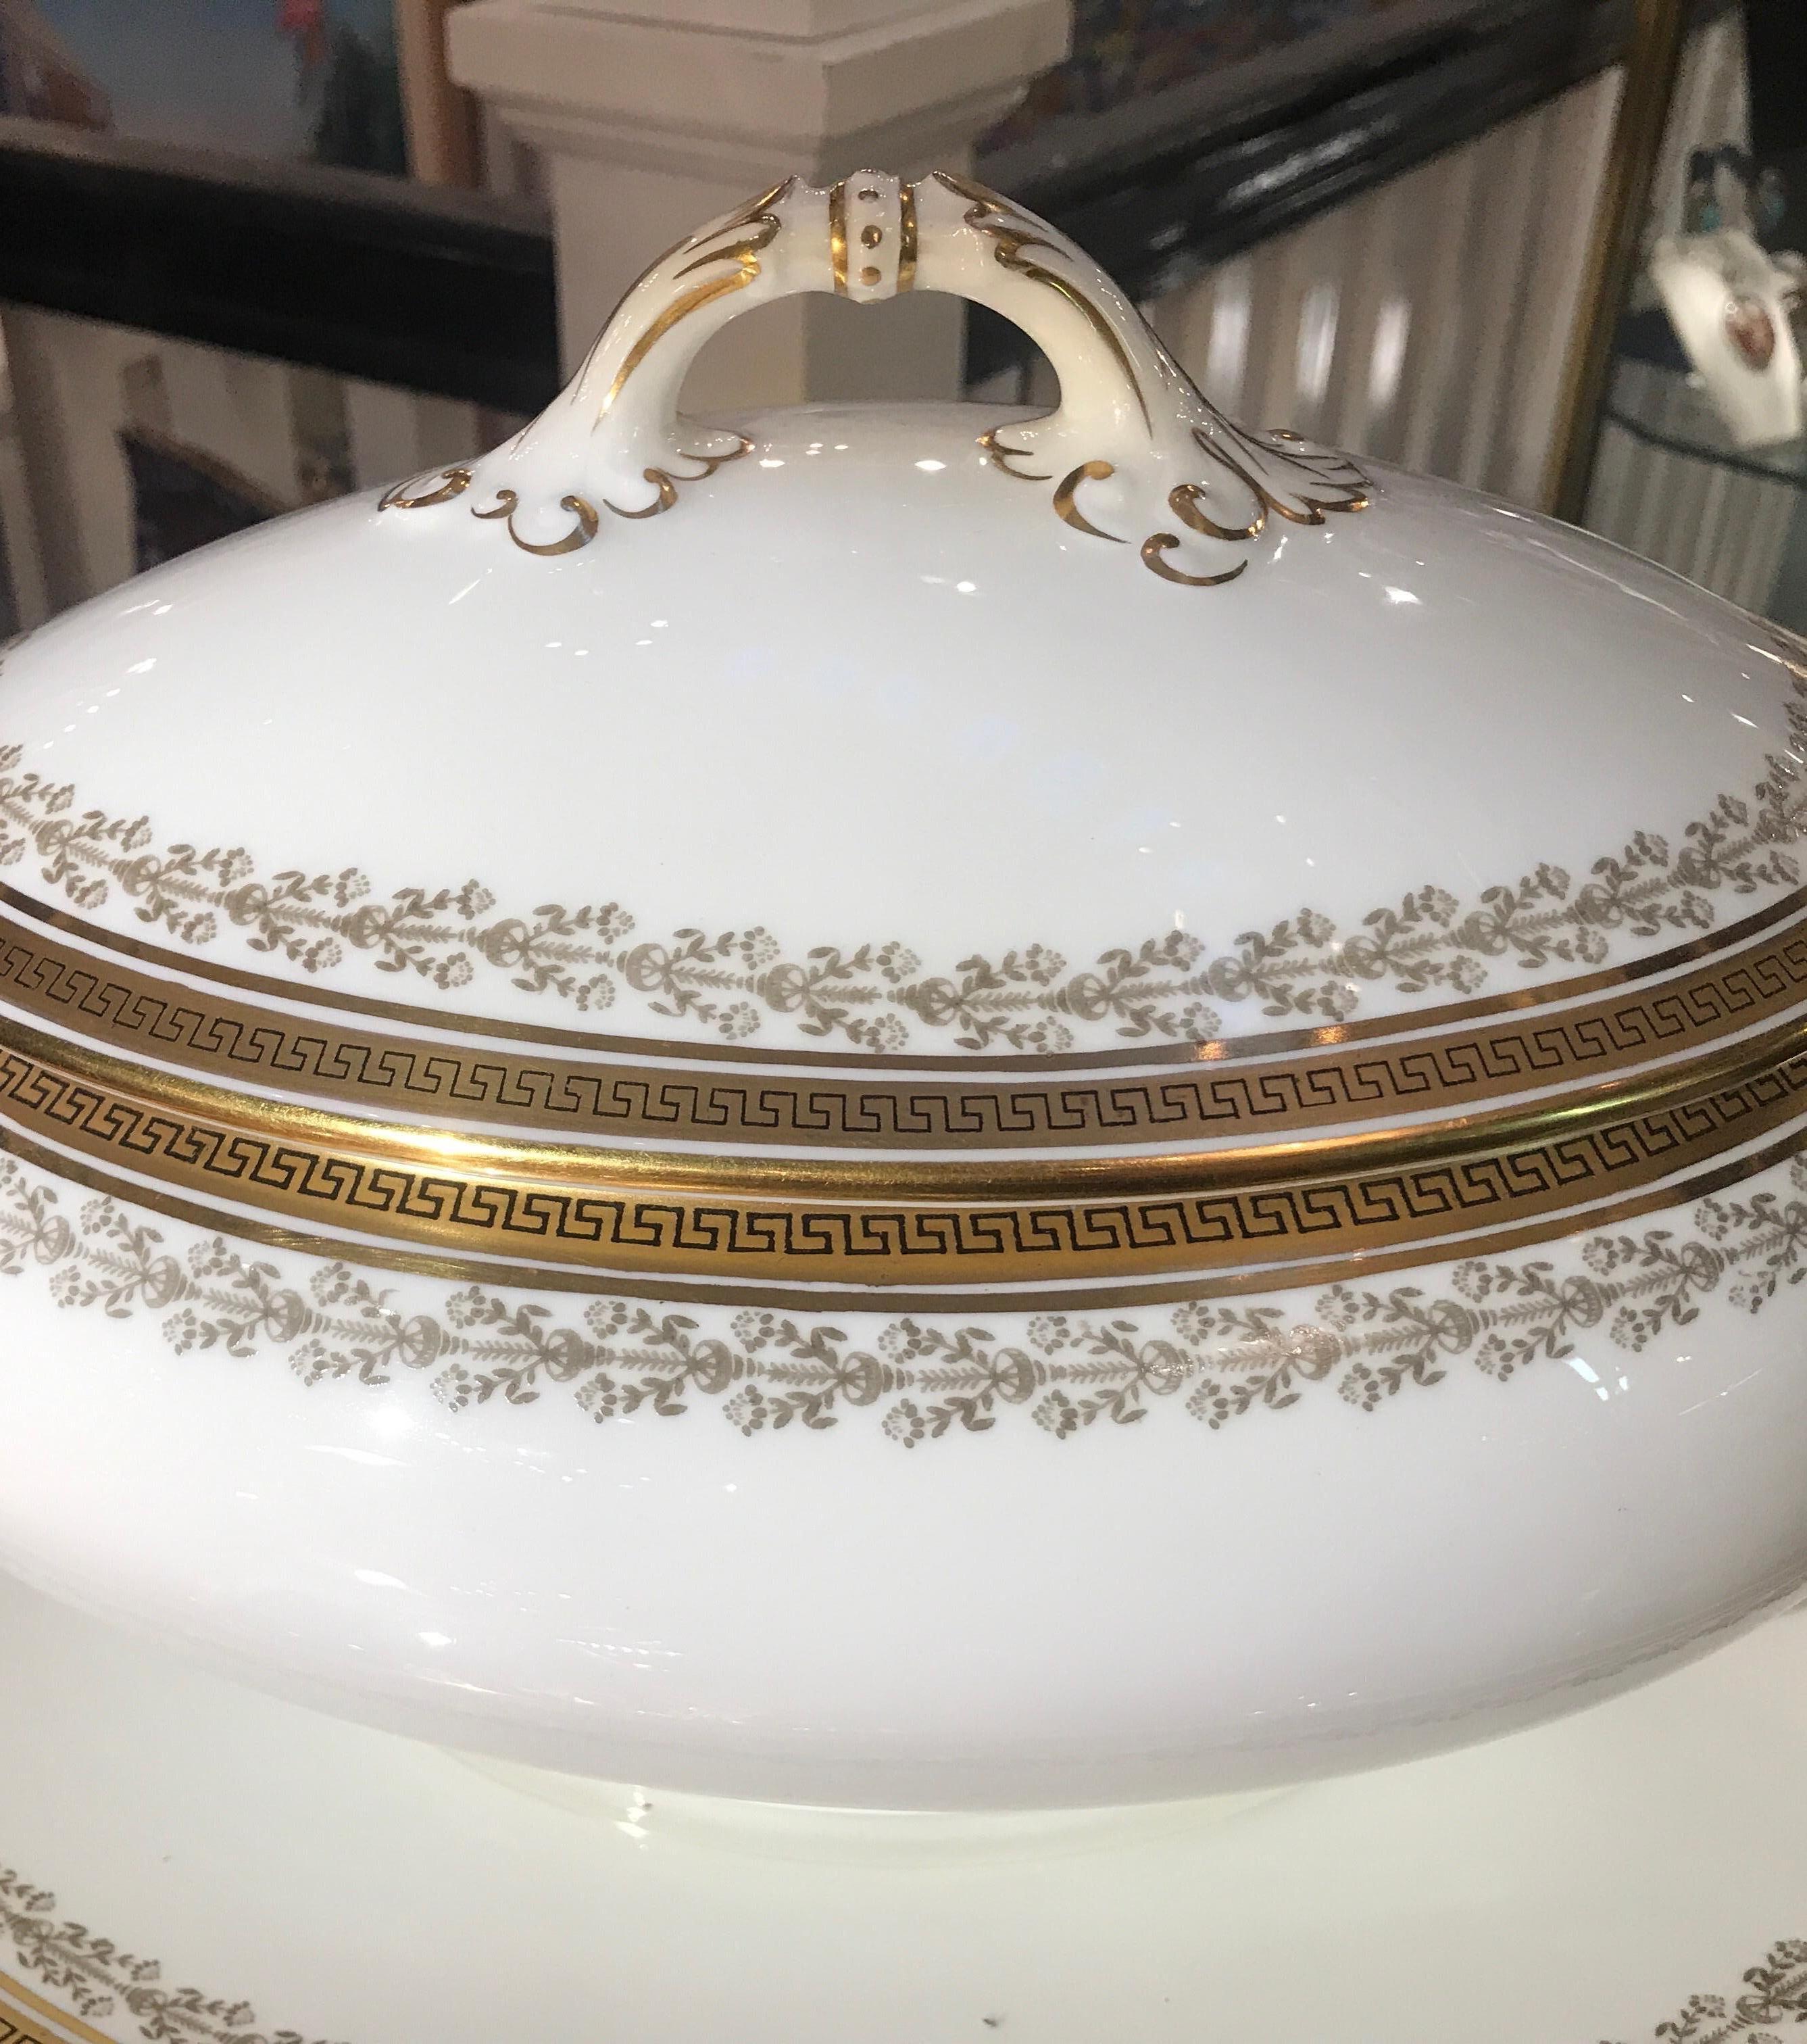 Elegant large soup tureen with oval underplate. England, circa 1910 made by Cauldon. The white porcelain with gilt Greek key decoration on the lid, tureen and underplate. The Classic white and gold will complement almost any dinnerware service.